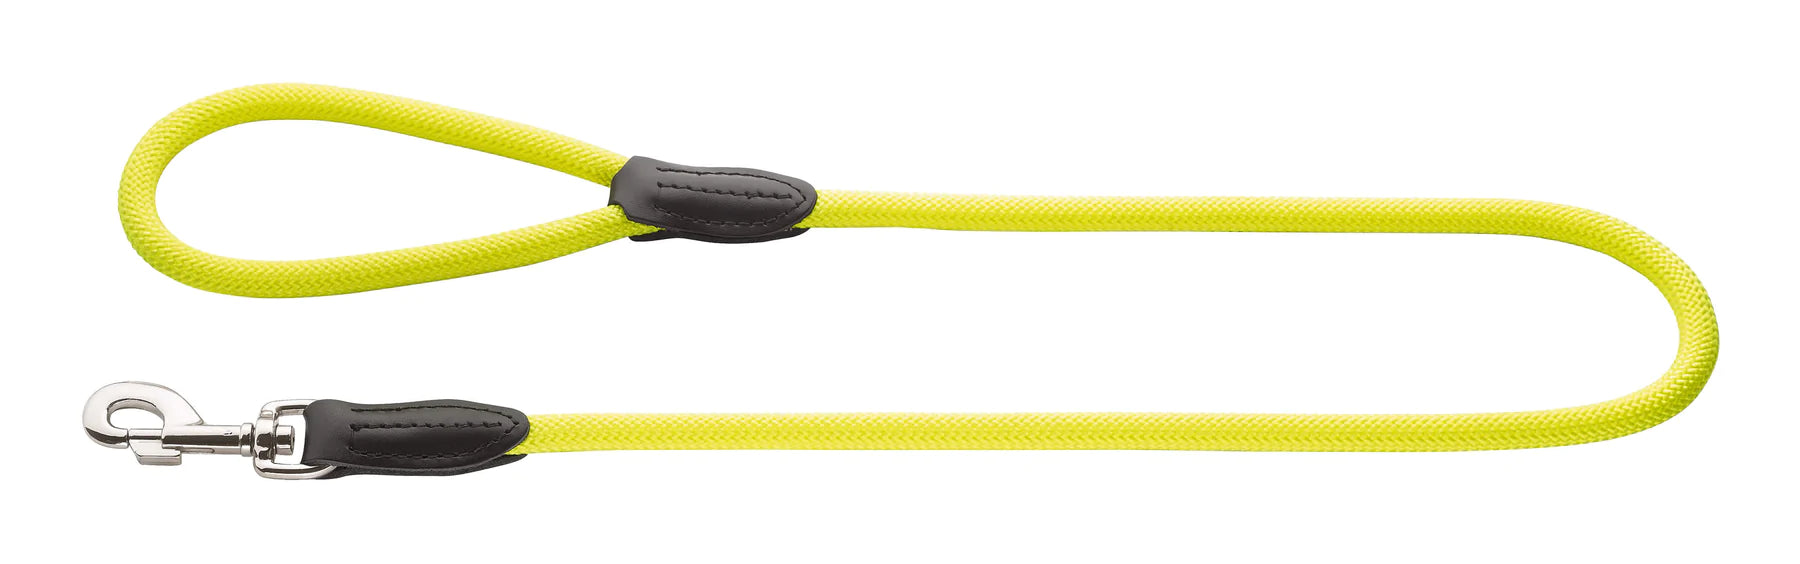 Hunter Leash Freestyle Neon - Just Horse Riders